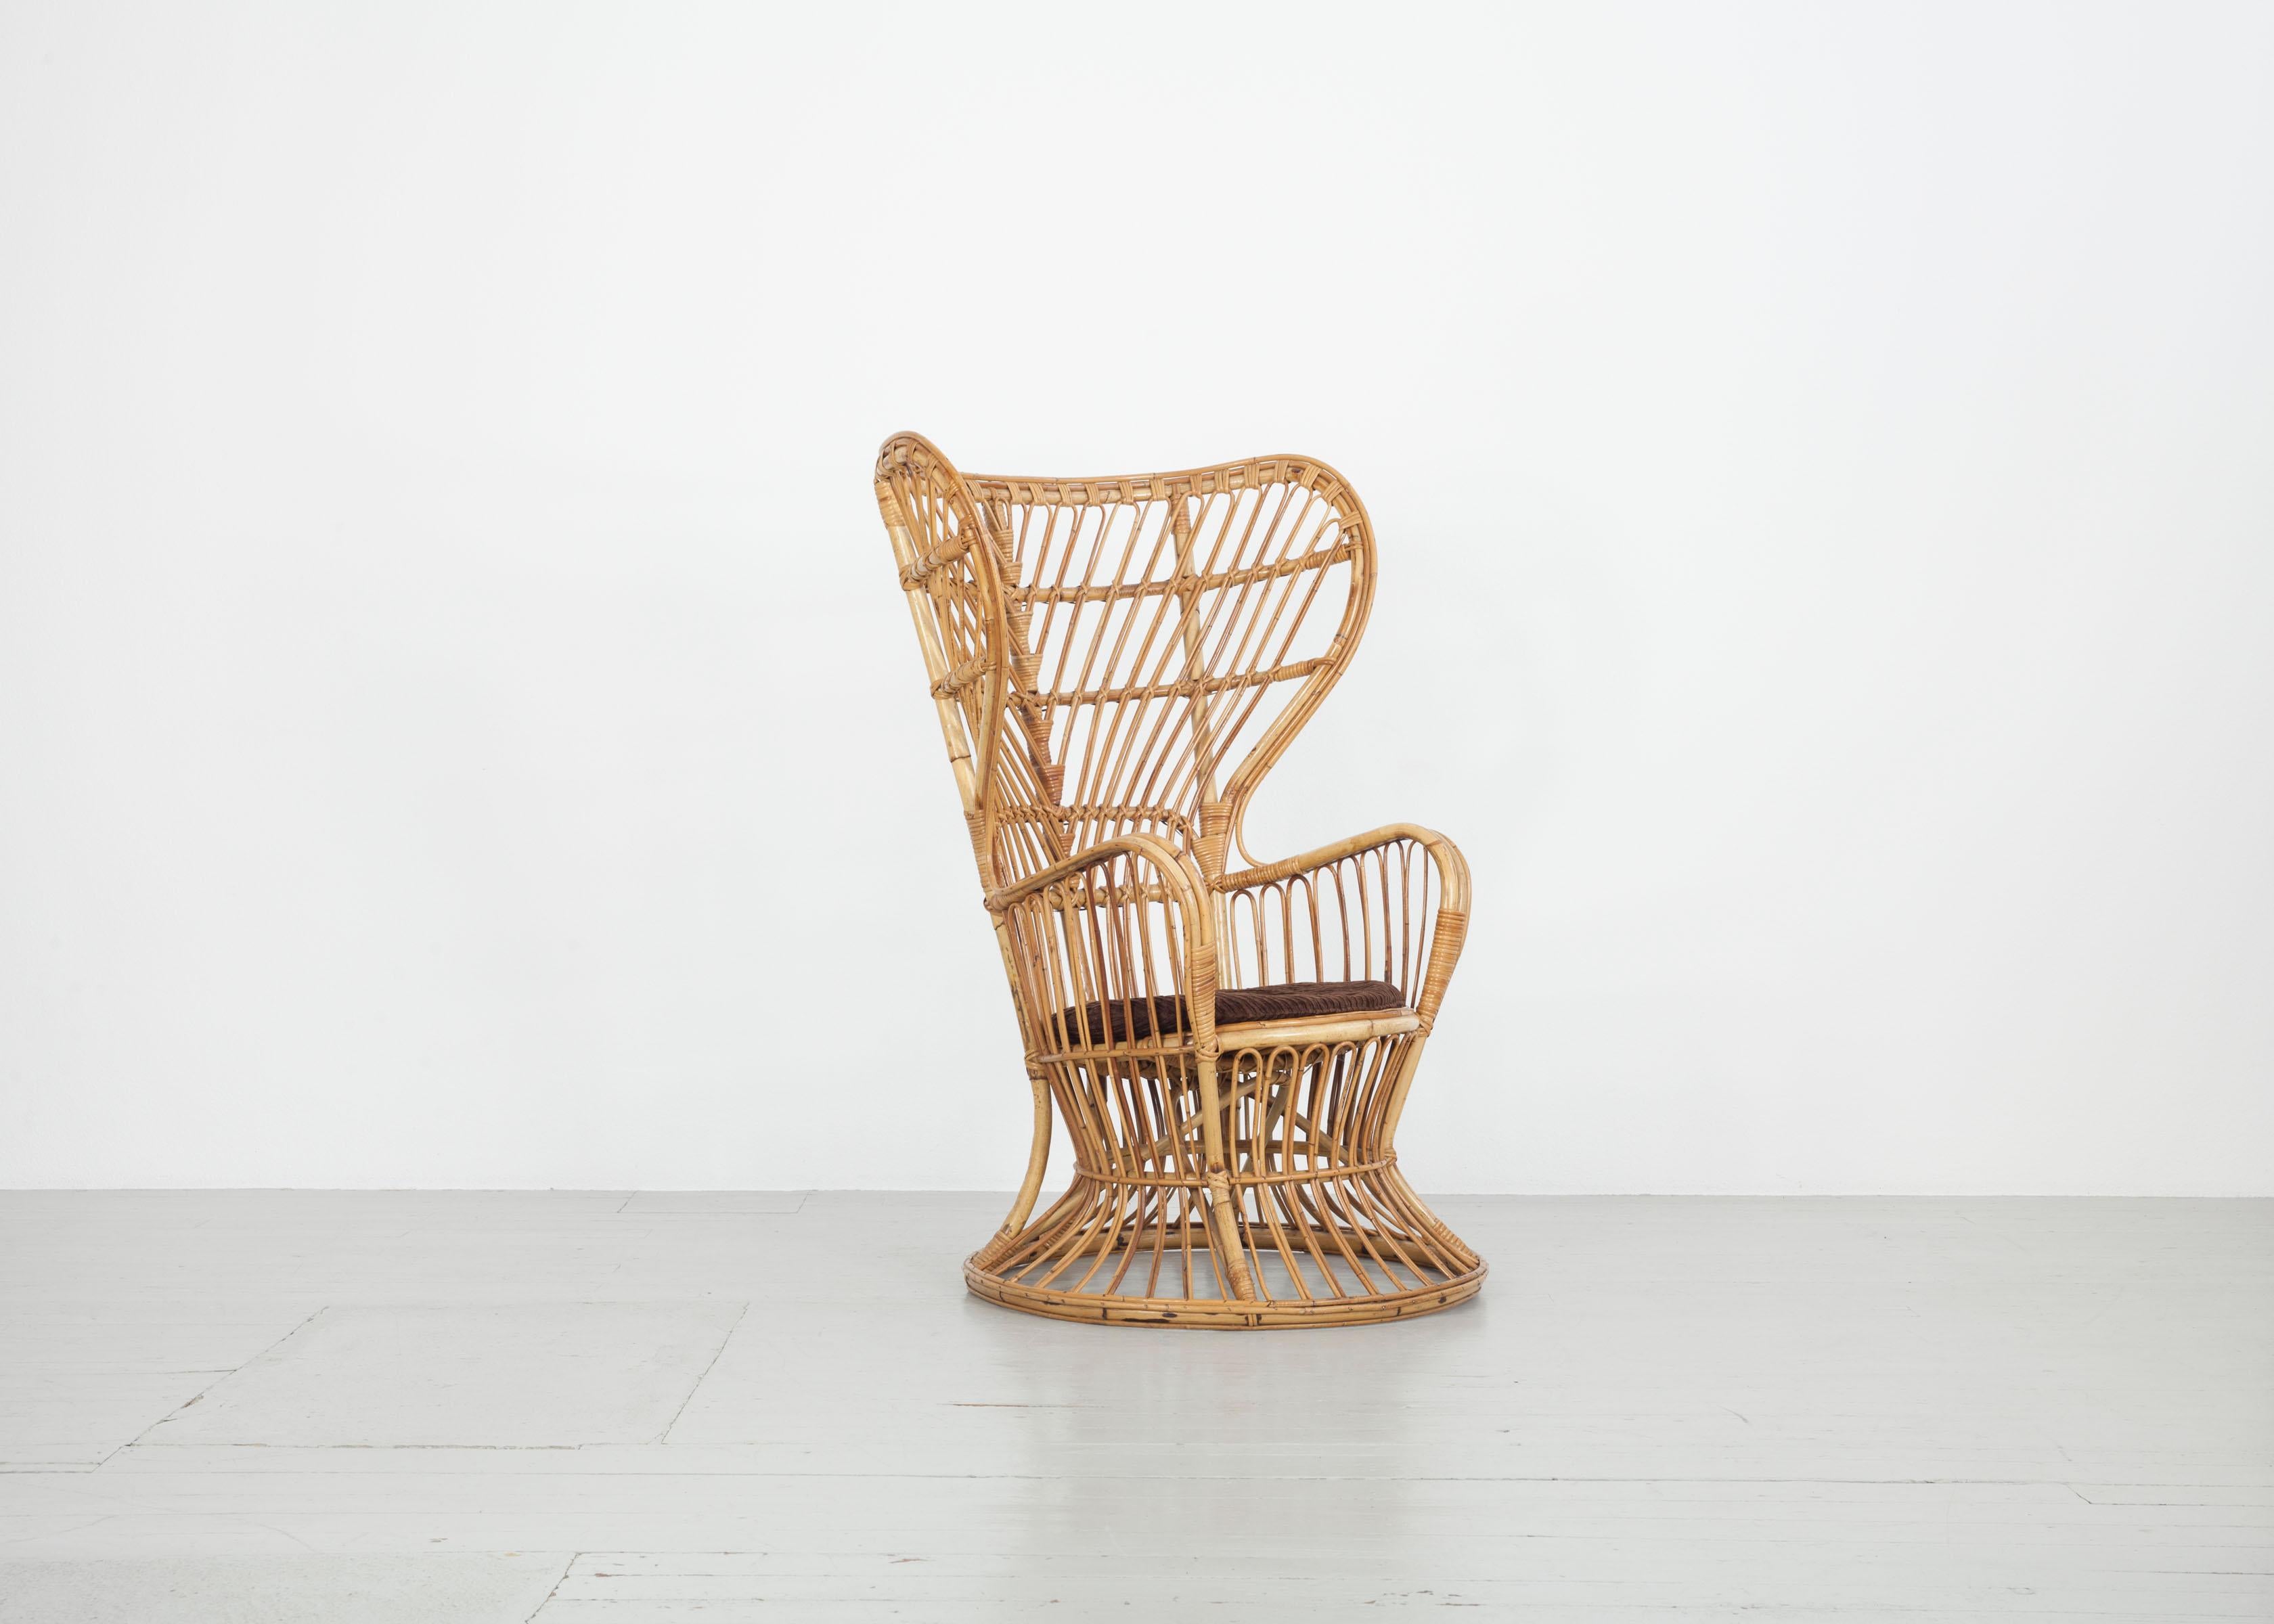 

This extremely comfortable wicker armchair was presumably designed by Lio Carminati and Gio Ponti in the 1950s and manufactured by Vittorio Bonacina in Italy. It has a high backrest and curved constructions made of bamboo and metal. The piece of